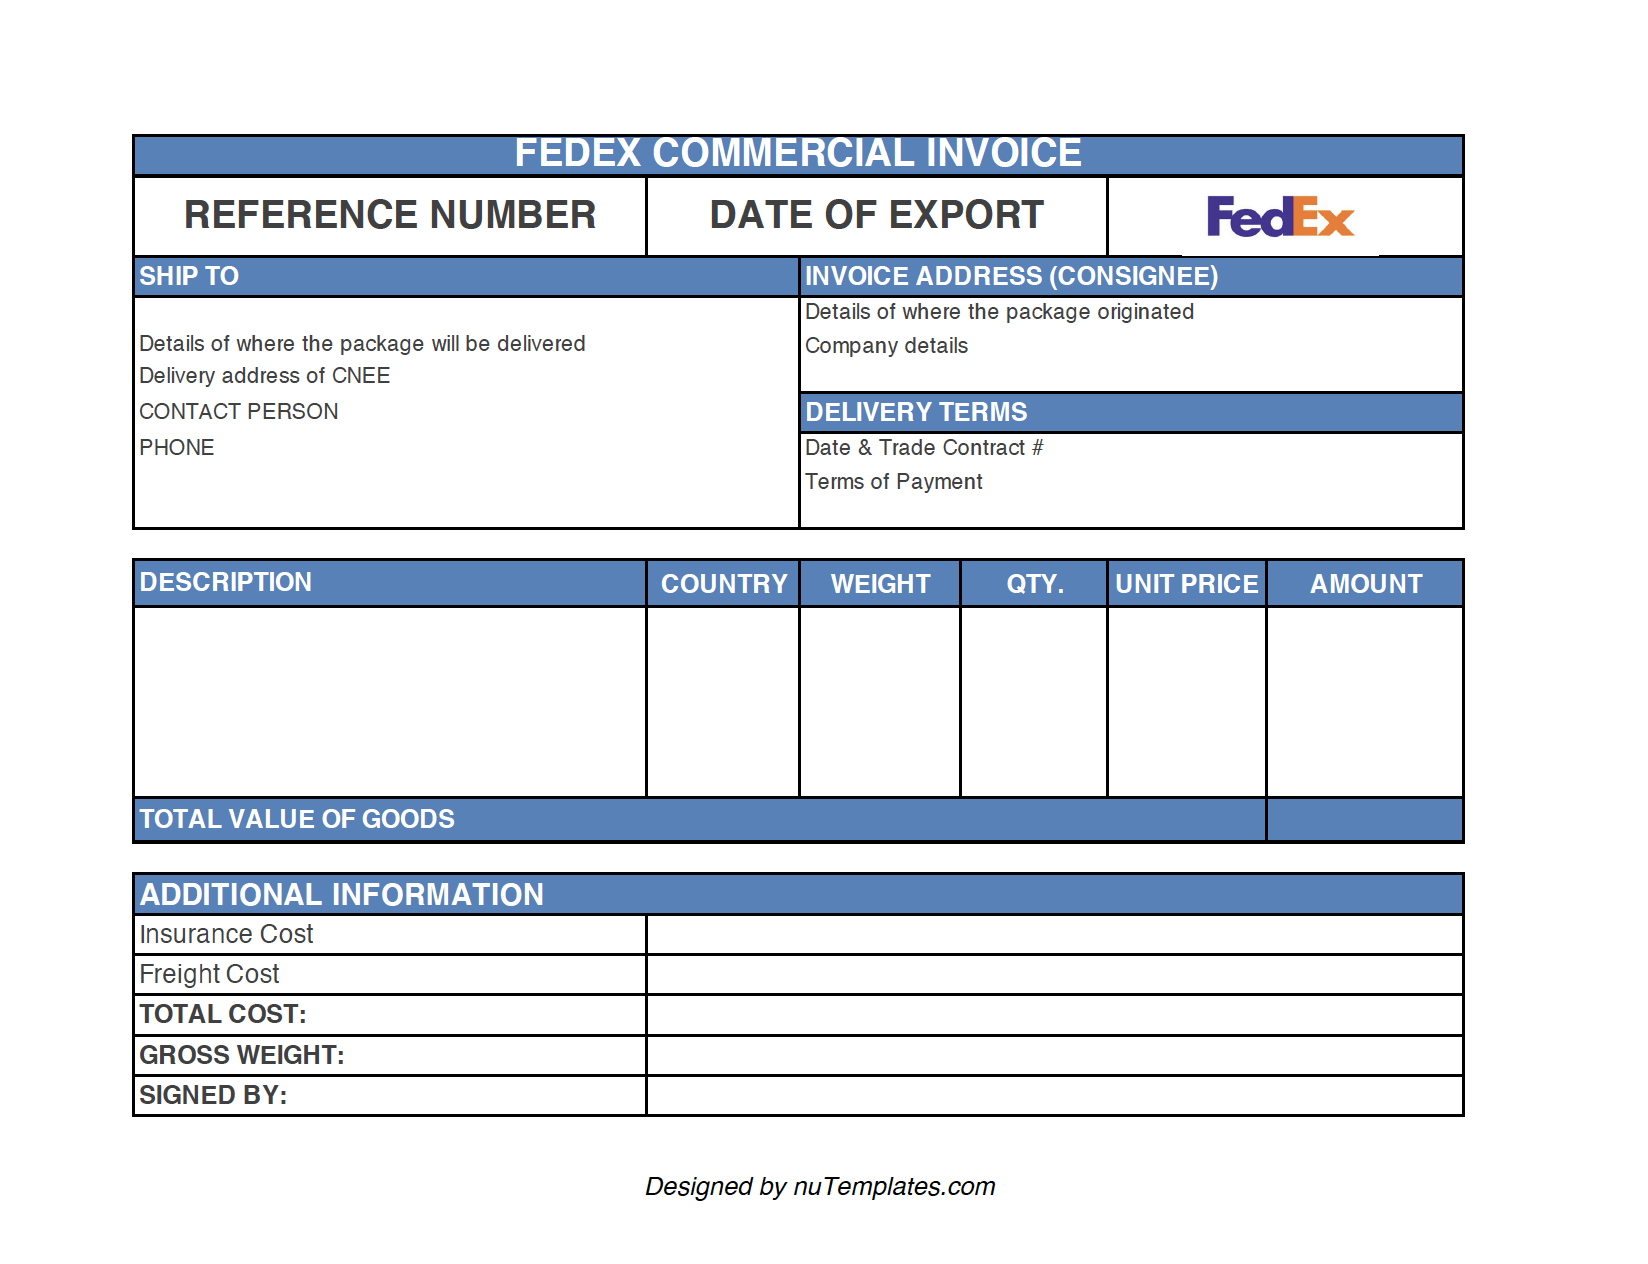 fedex commercial invoice template img